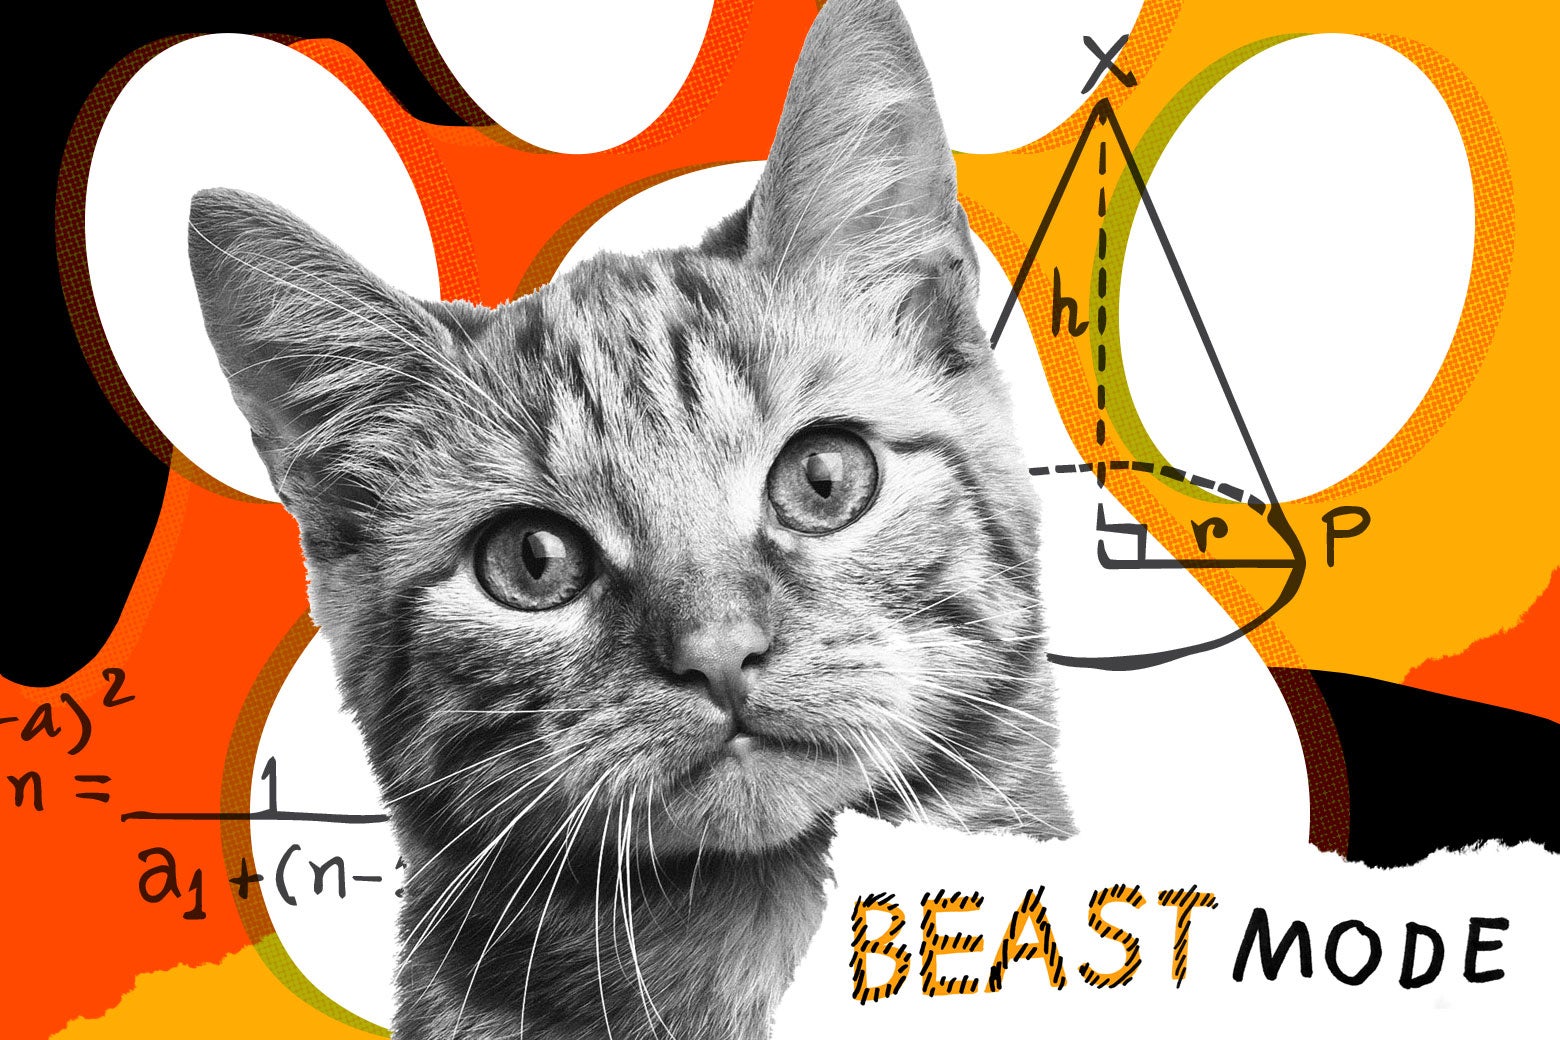 Food puzzles and cats: pet advice from Beast Mode.